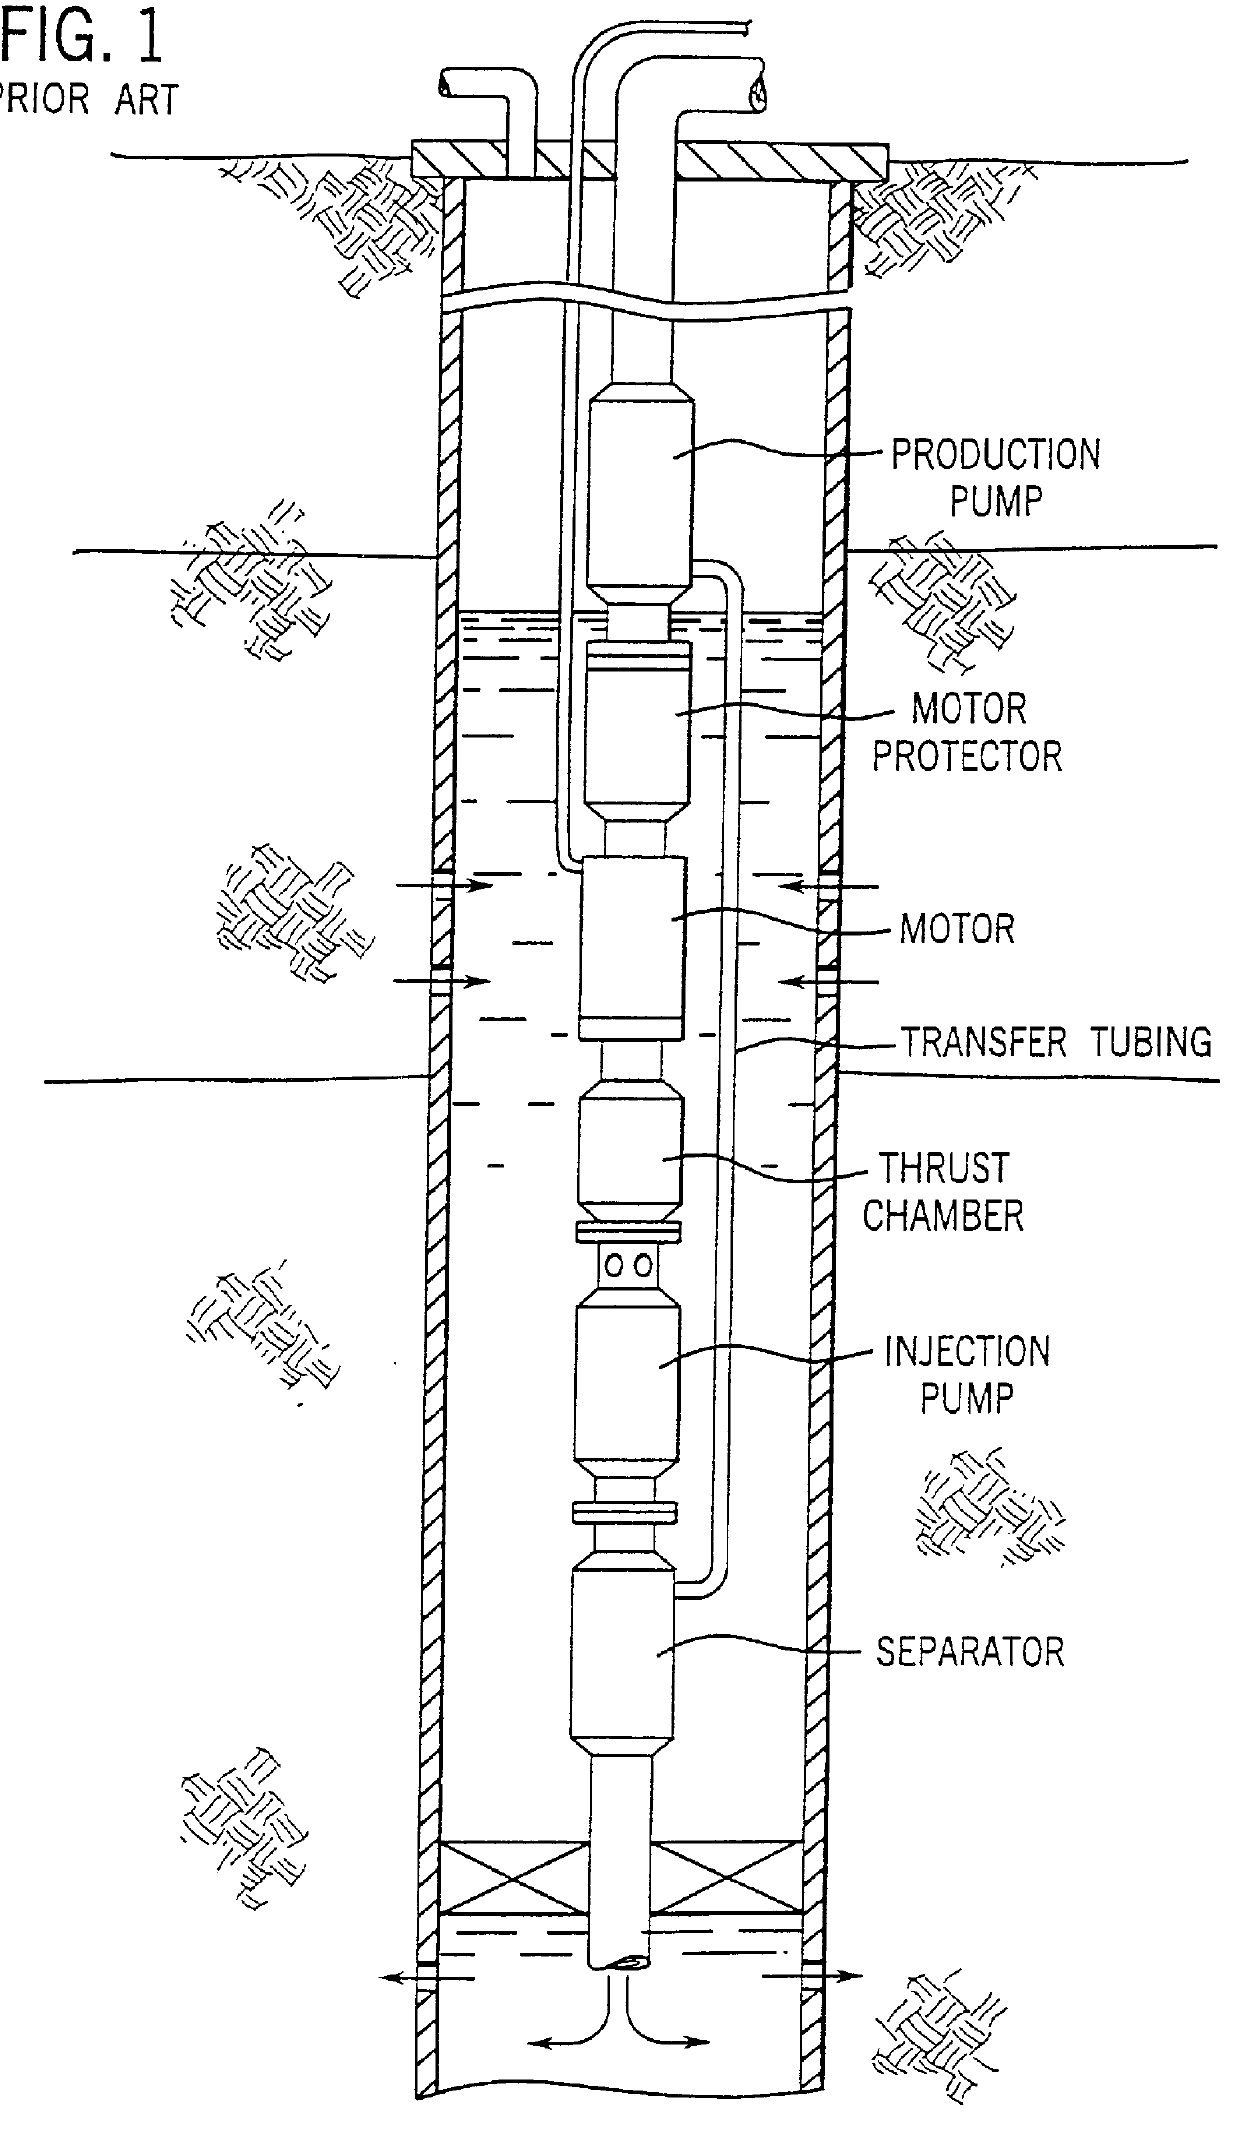 Downhole fluid separation system incorporating a drive-through separator and method for separating wellbore fluids